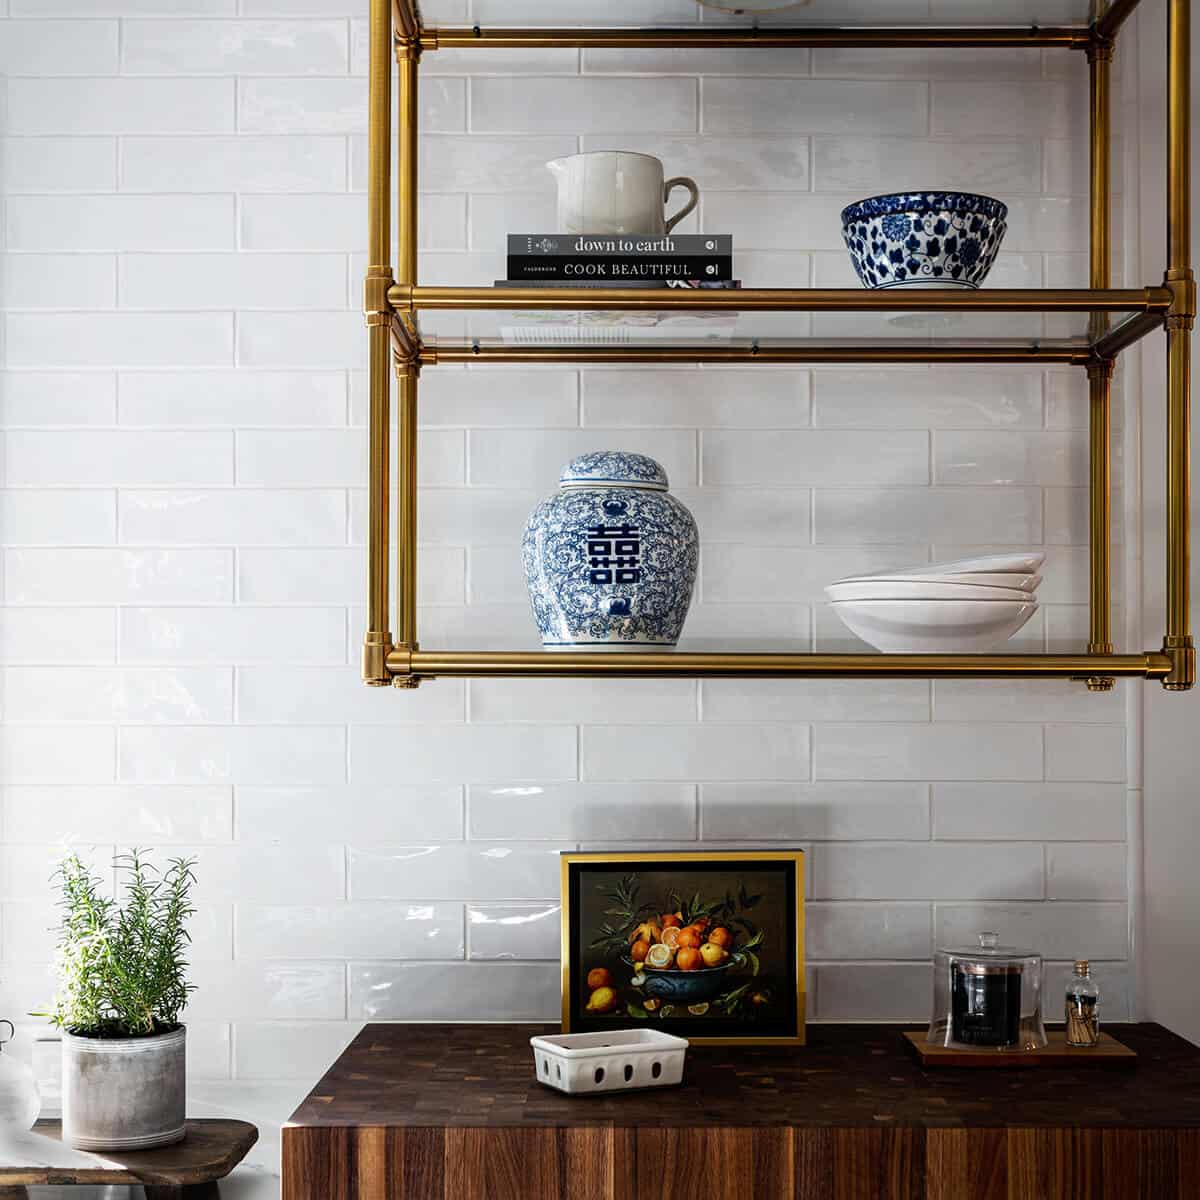 Modern kitchen with top hung shelves for storing glassware and ceramics